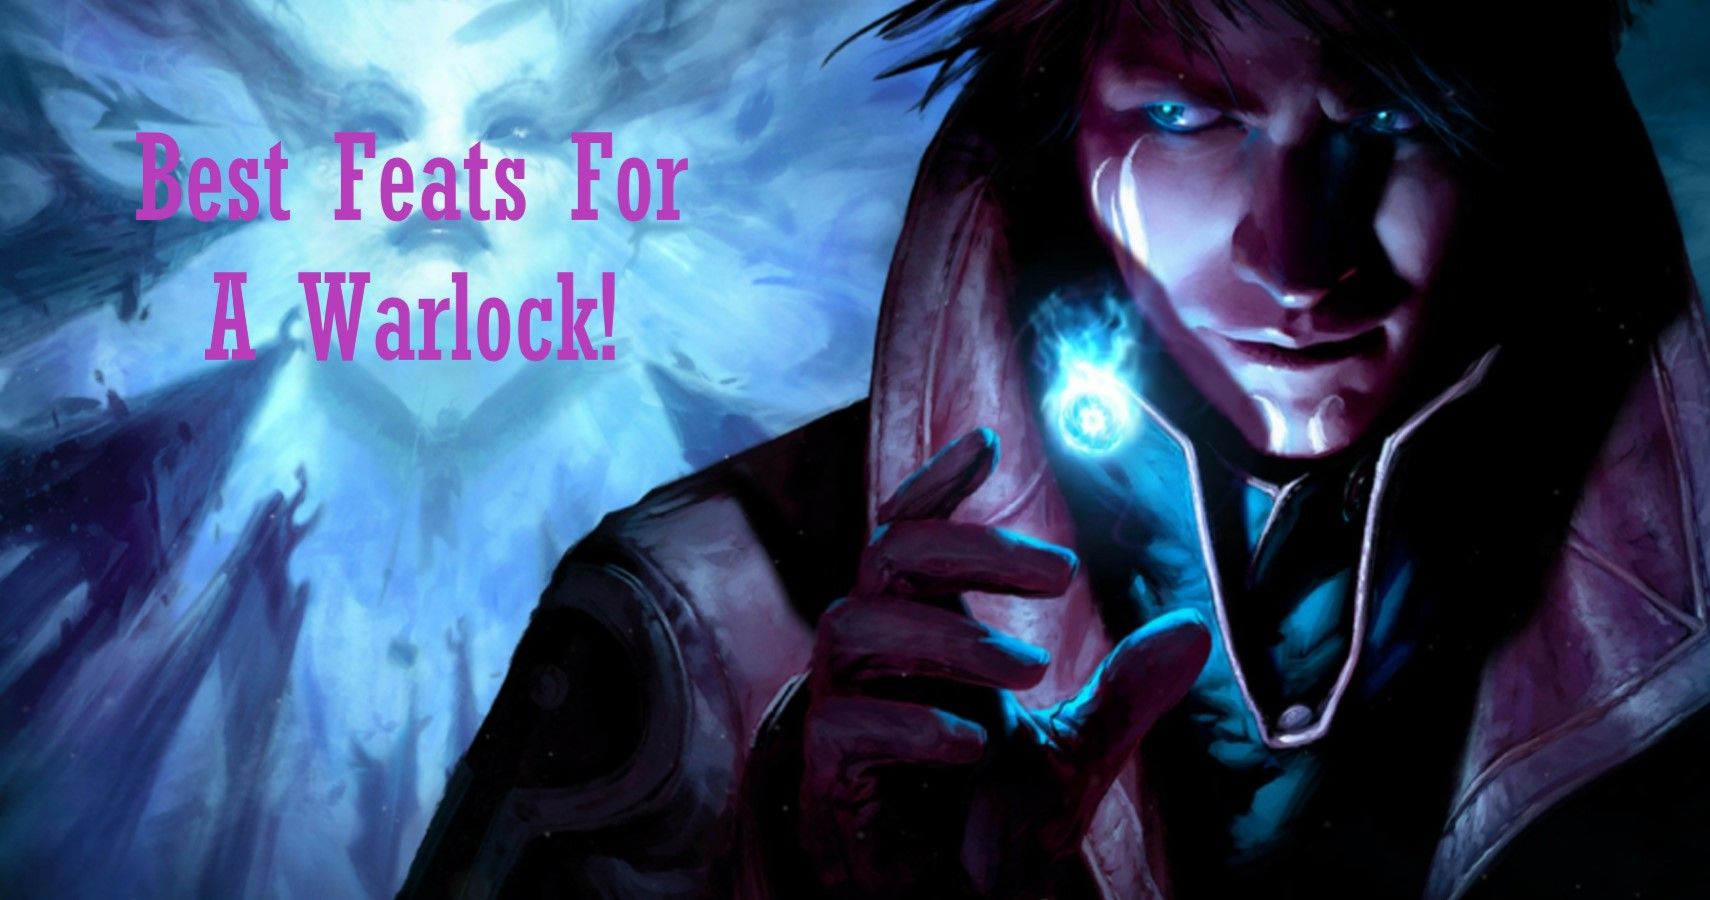 Dungeons Dragons The Best Feats For A Warlock Thegamer Images, Photos, Reviews